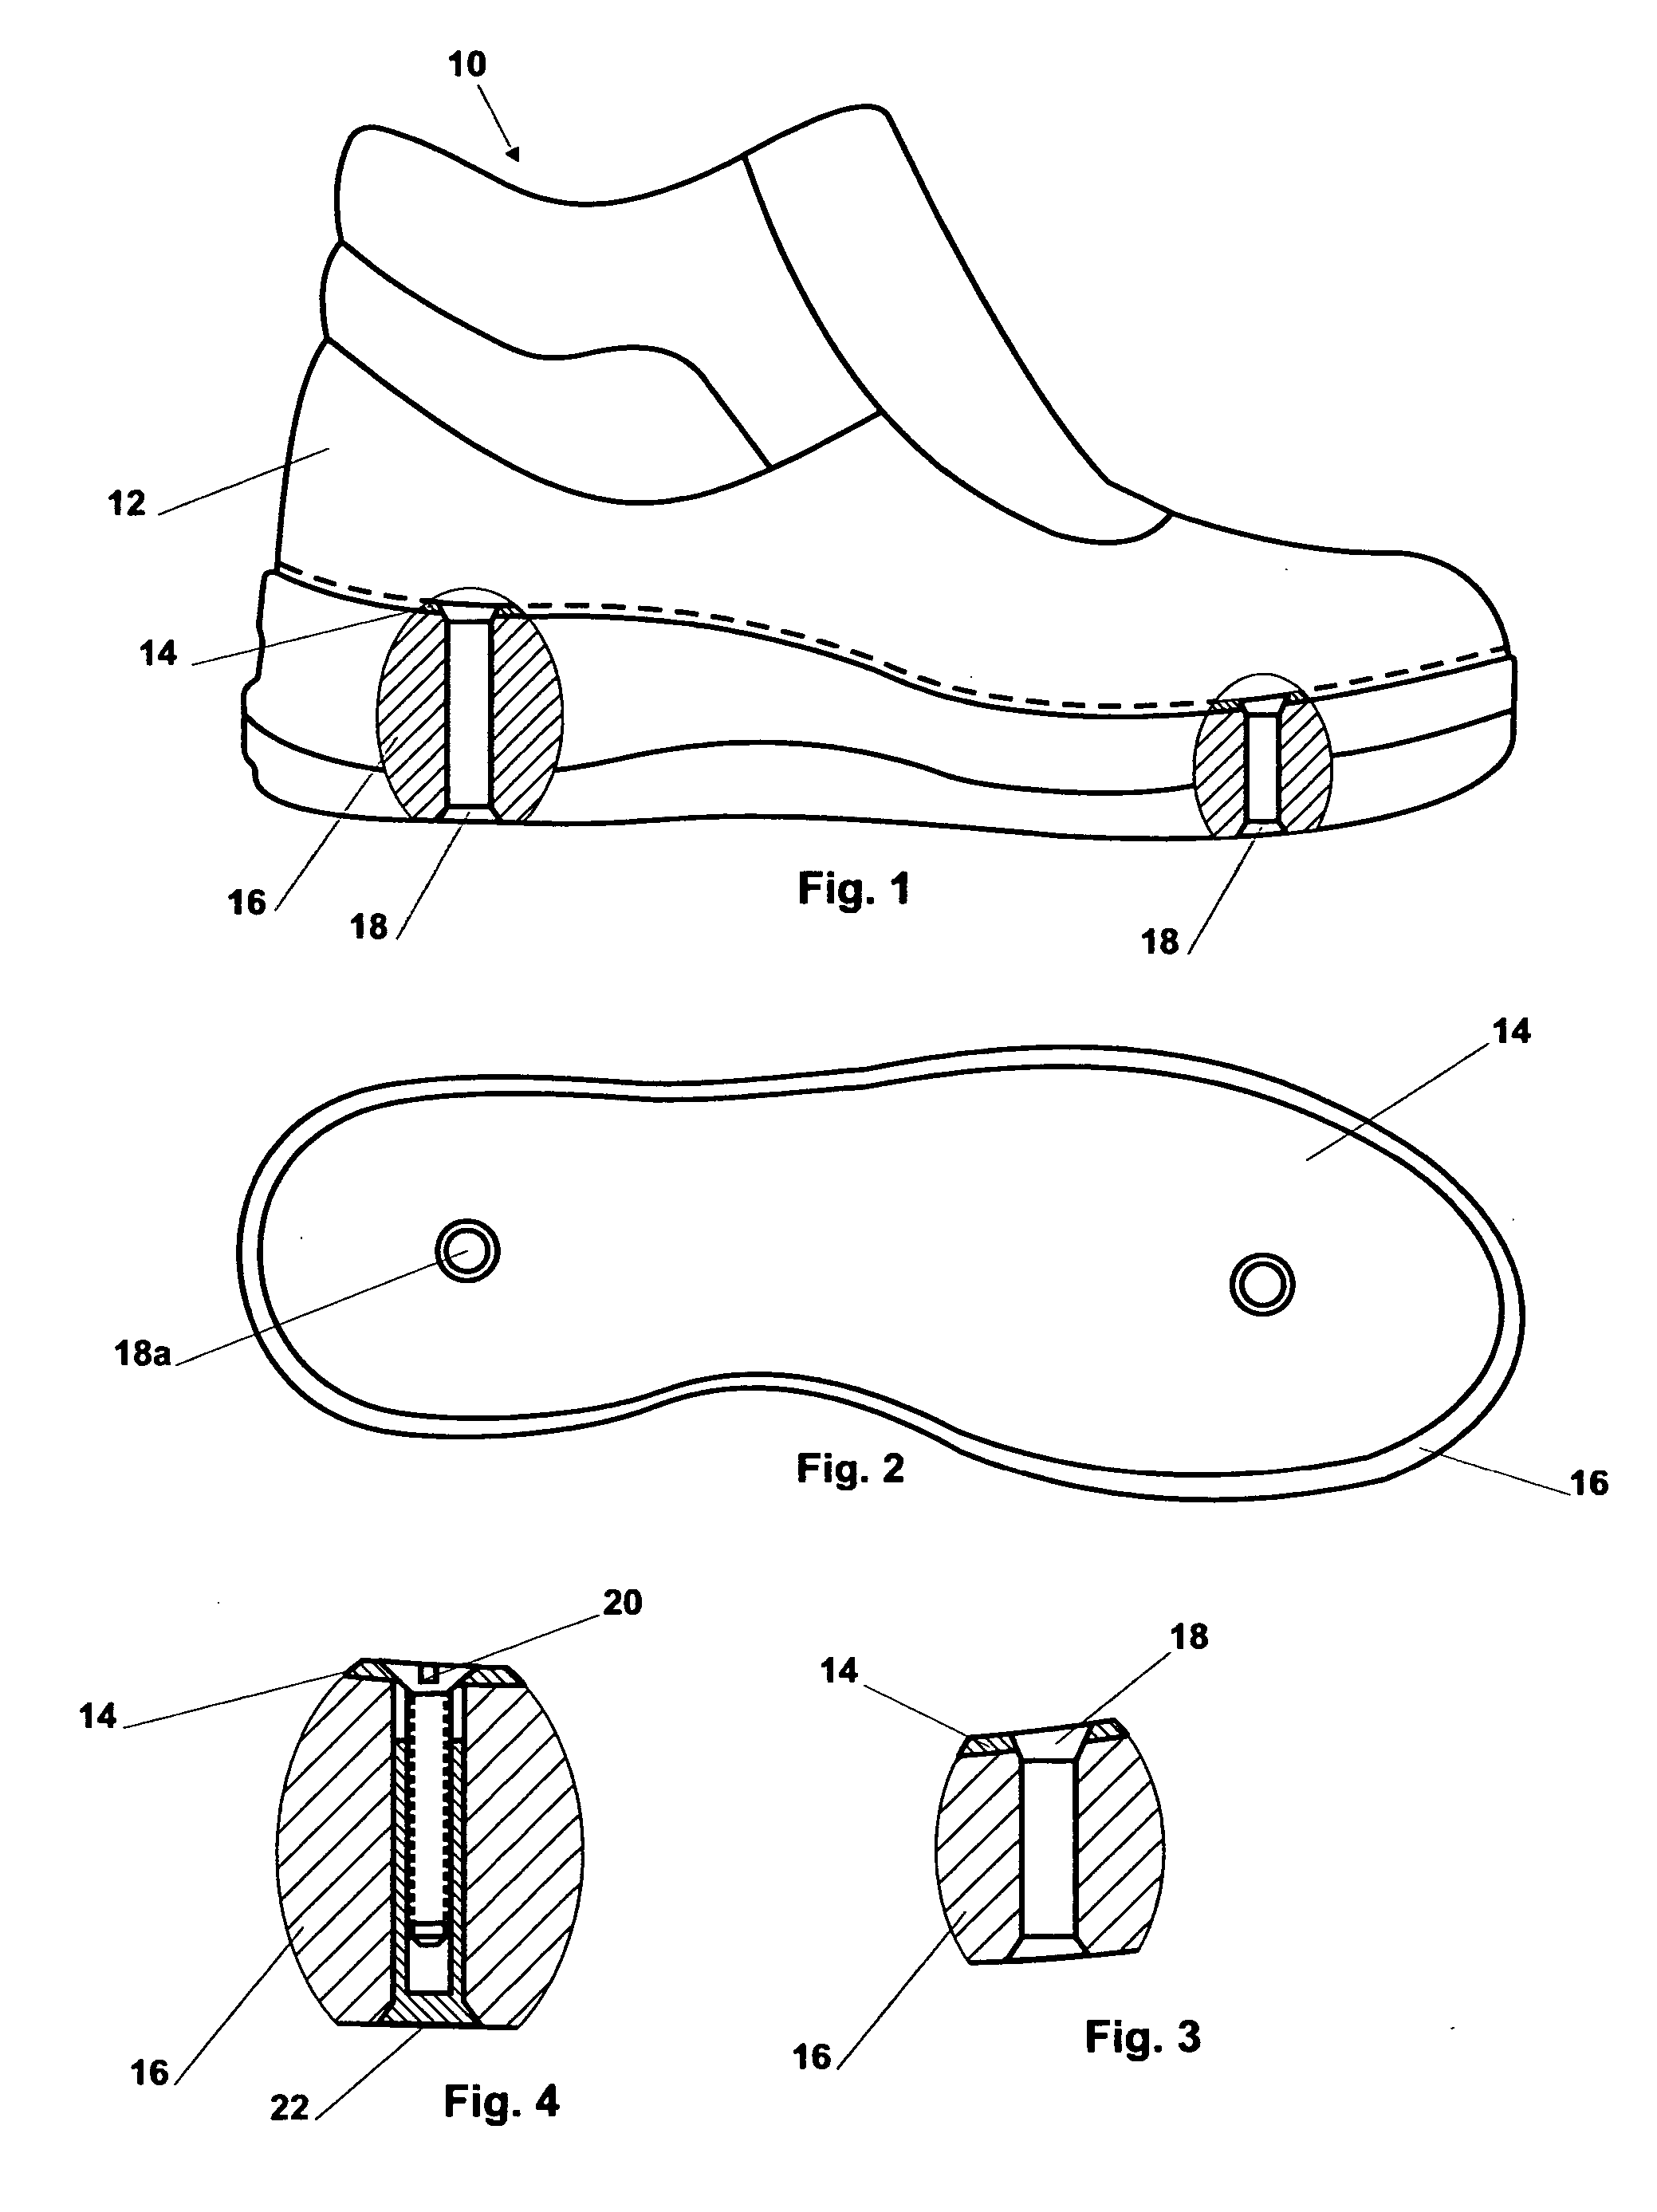 Shoes with electrostatical grounding